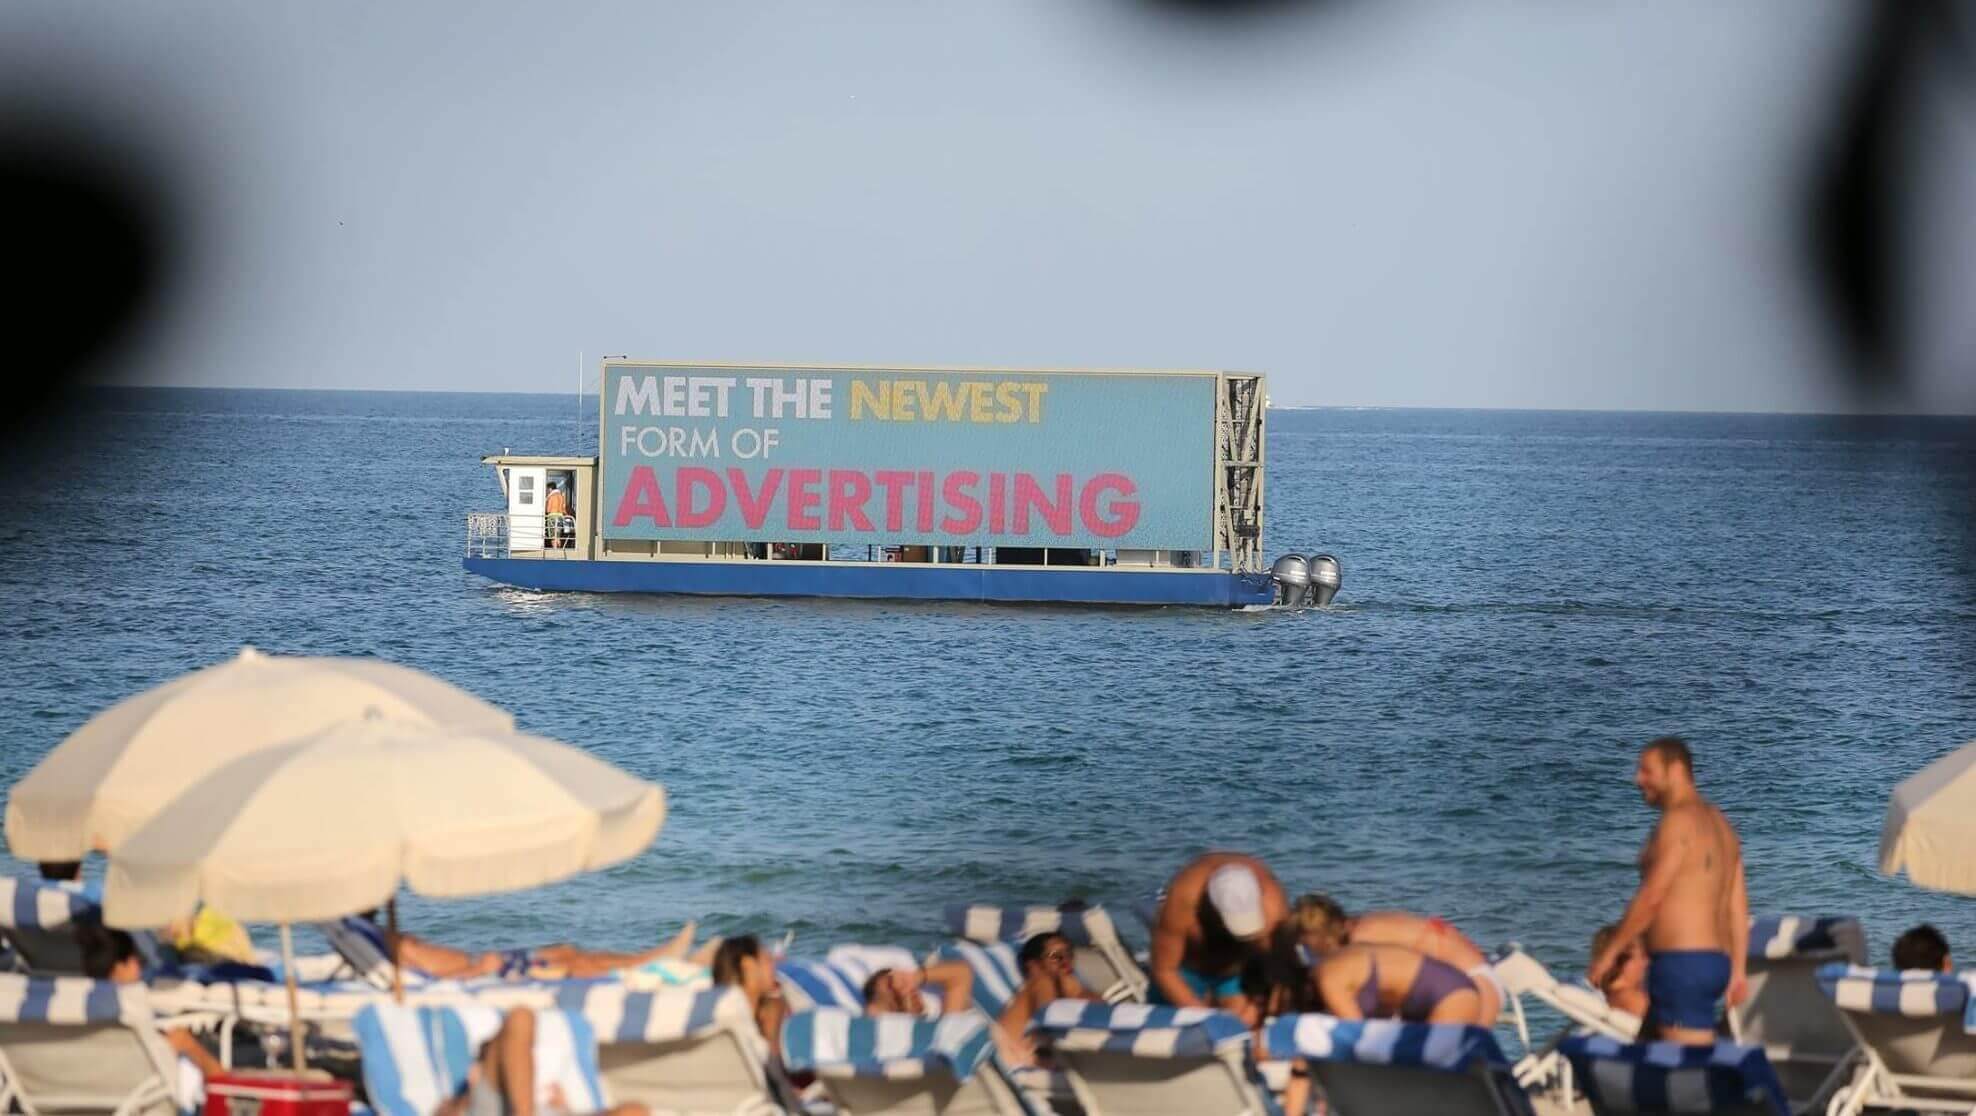 Boat billboard advertising is another effective way to spread the message, due to Miami's buzzing beach population